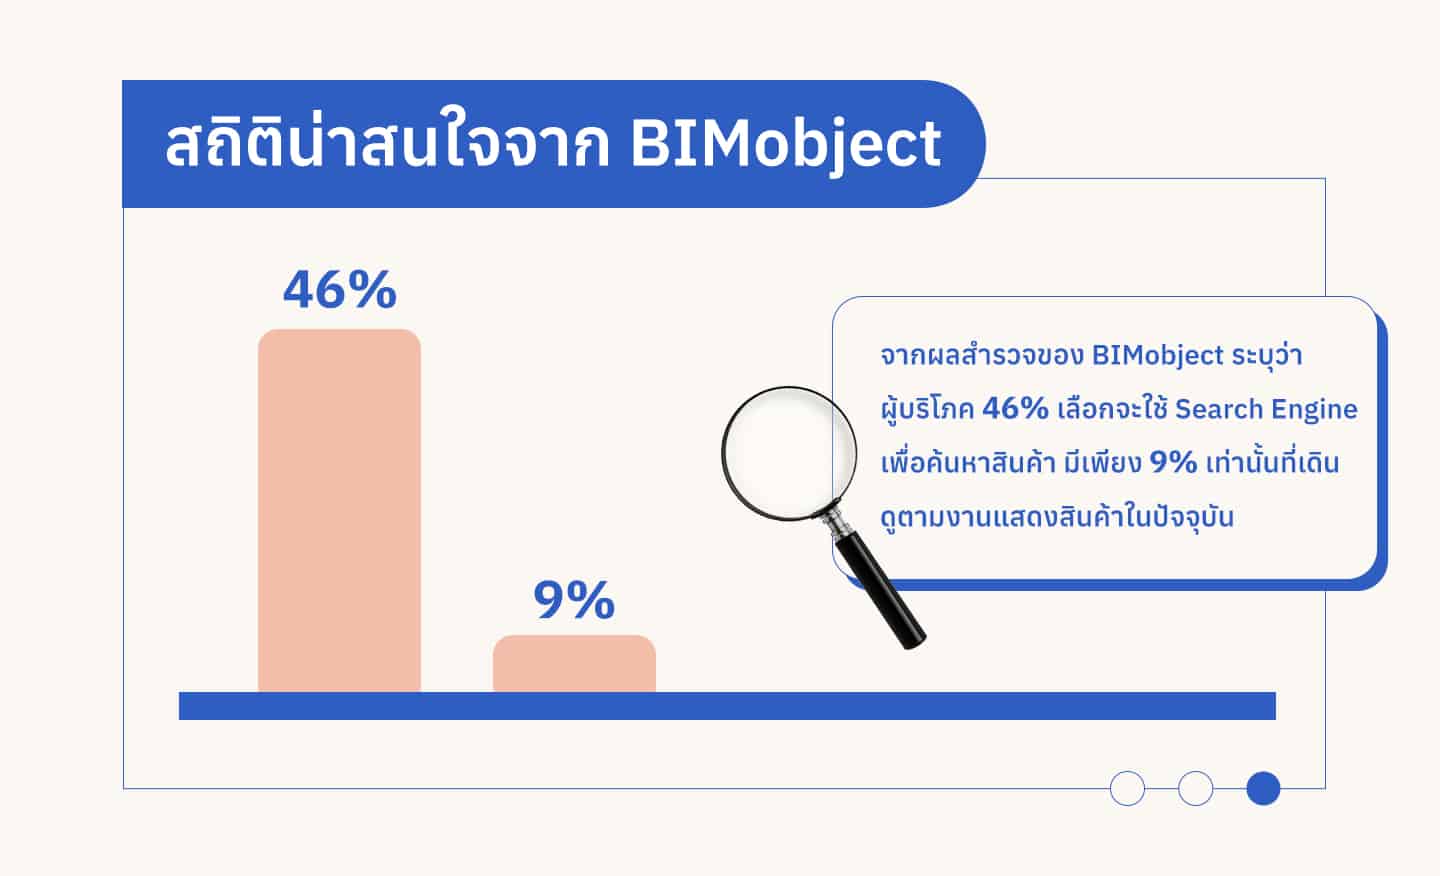 BIMobject-how-to-adjust-your-on-ground-marketing-01